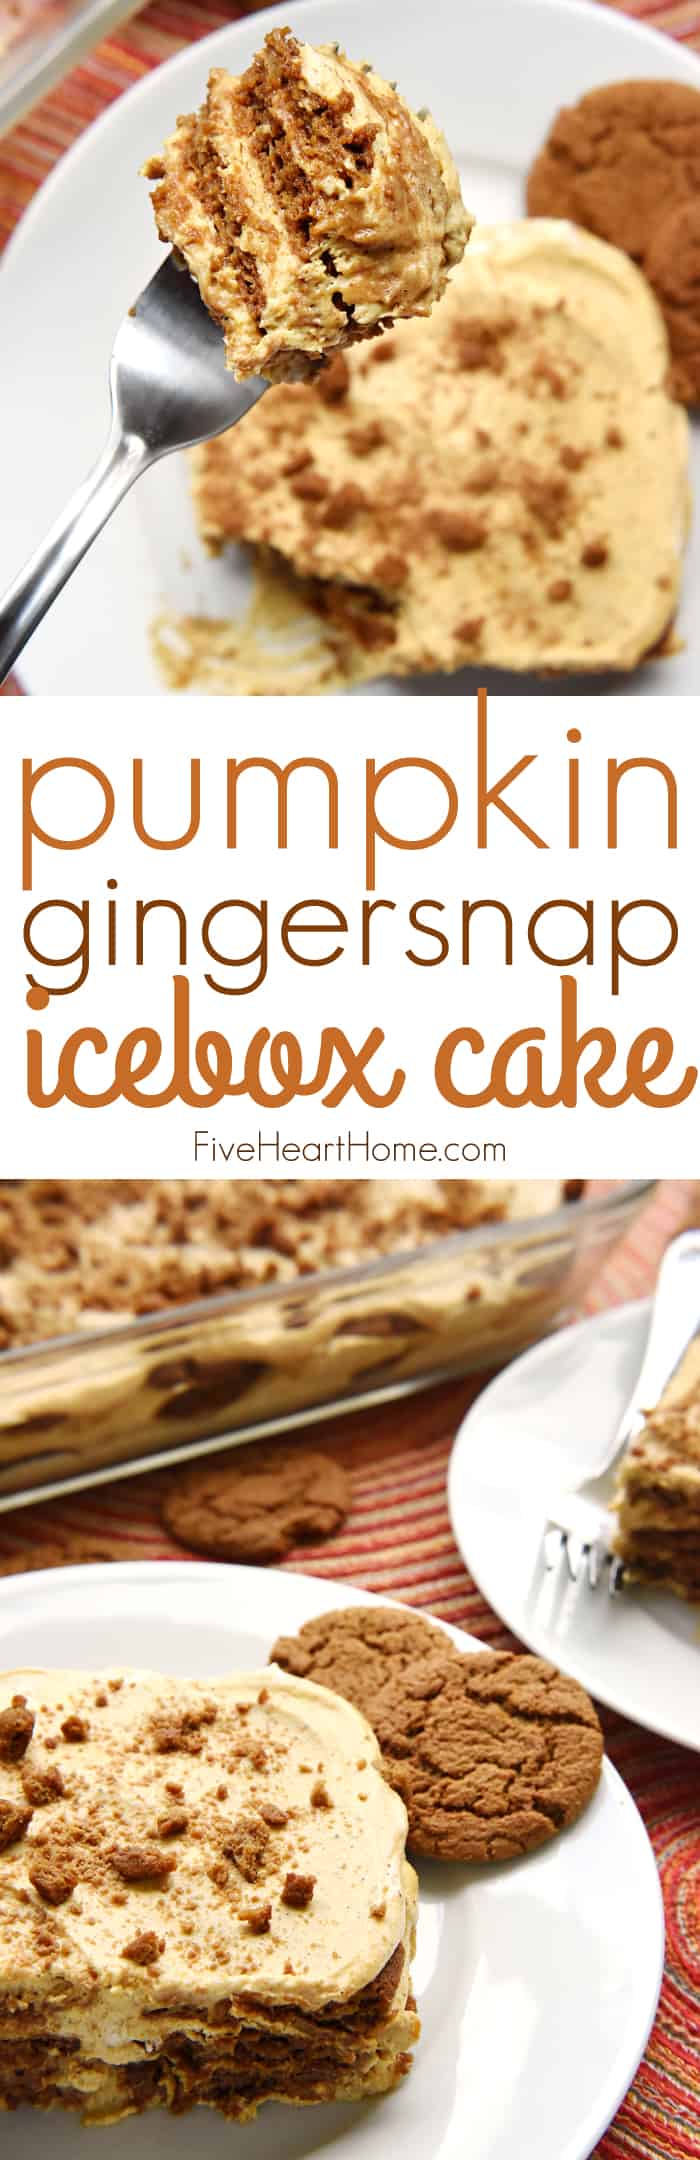 Pumpkin Gingersnap Icebox Cake ~ an easy, no-bake fall dessert of pumpkin, cream cheese, and fresh whipped cream layered with gingersnap cookies that transforms into soft, creamy cake after chilling in the refrigerator! | FiveHeartHome.com via @fivehearthome